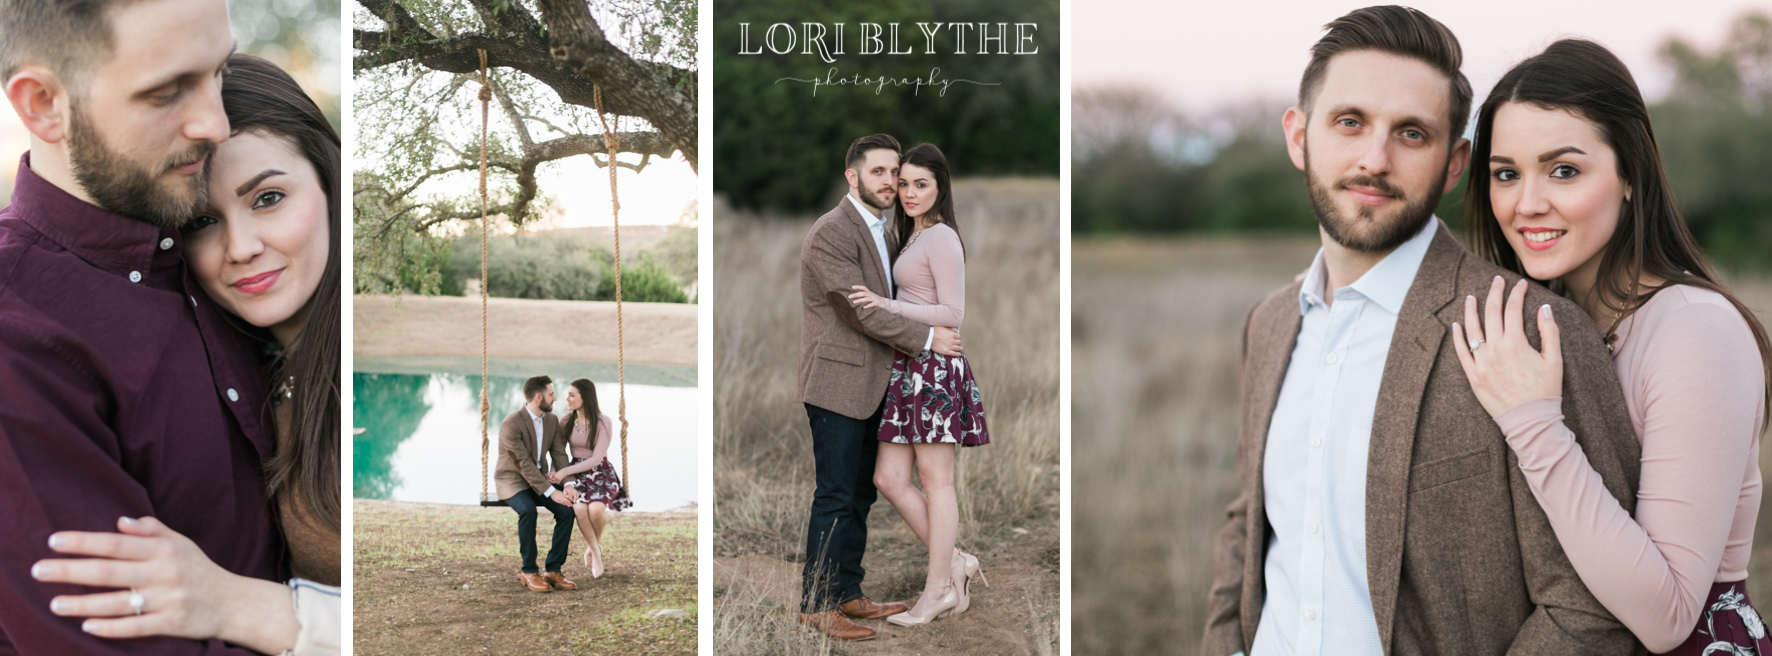 Brennan & Michelle's Engagement Session at Kendall Plantation in Boerne by Lori Blythe Photography